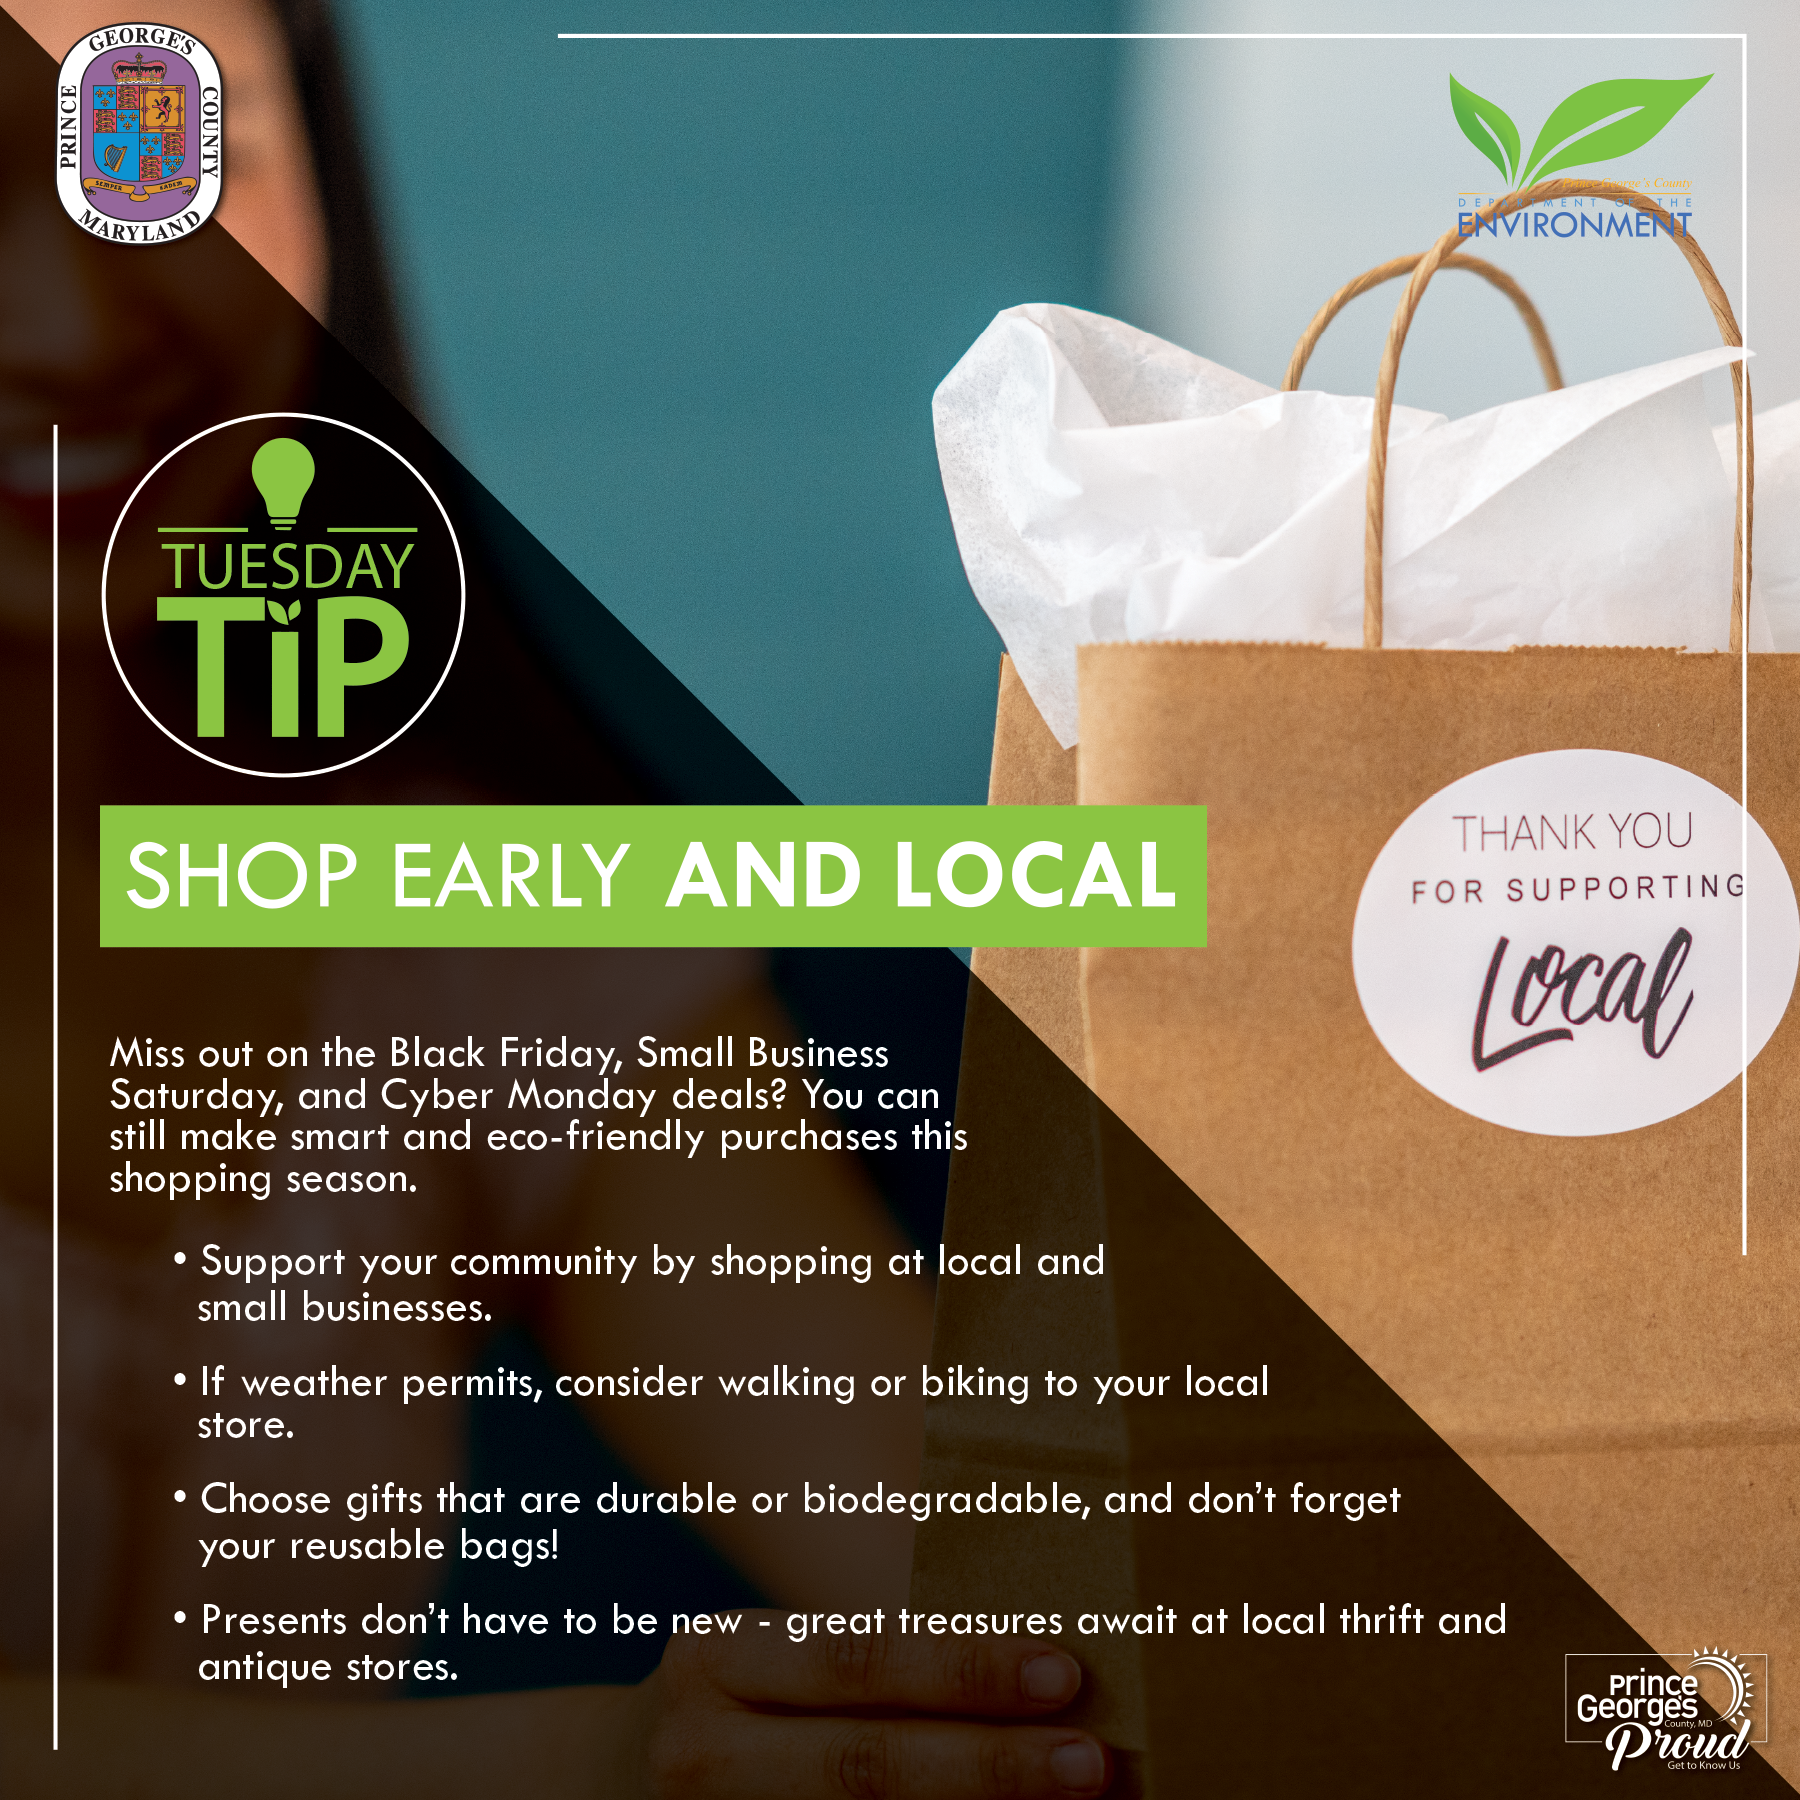 Tues tip 11.30.21 Shop local eng